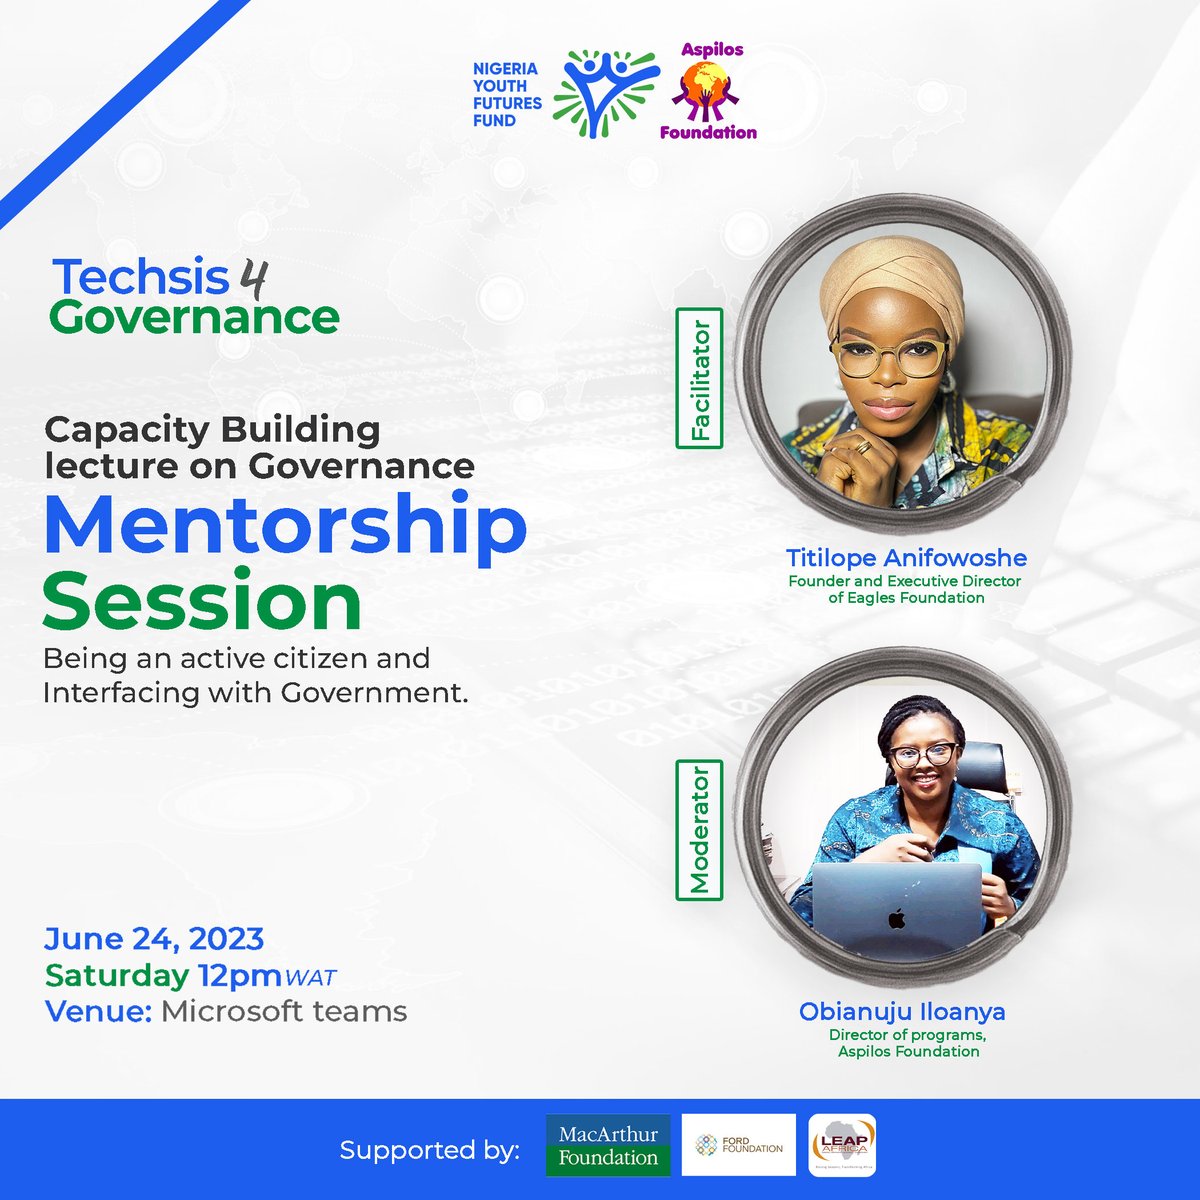 It's mentorship O'Clock.....Mentorship sessions for the TechSis for Governance training begins this Weekend.

Sessions would be facilitated by @d_LegalEagle &
@Wales_c

#Tech4Gov #DigitalGovernance
#TechSolutions #InnovationInGovernance
#GovTech #SmartGovernance
#TechEmpoweredGov